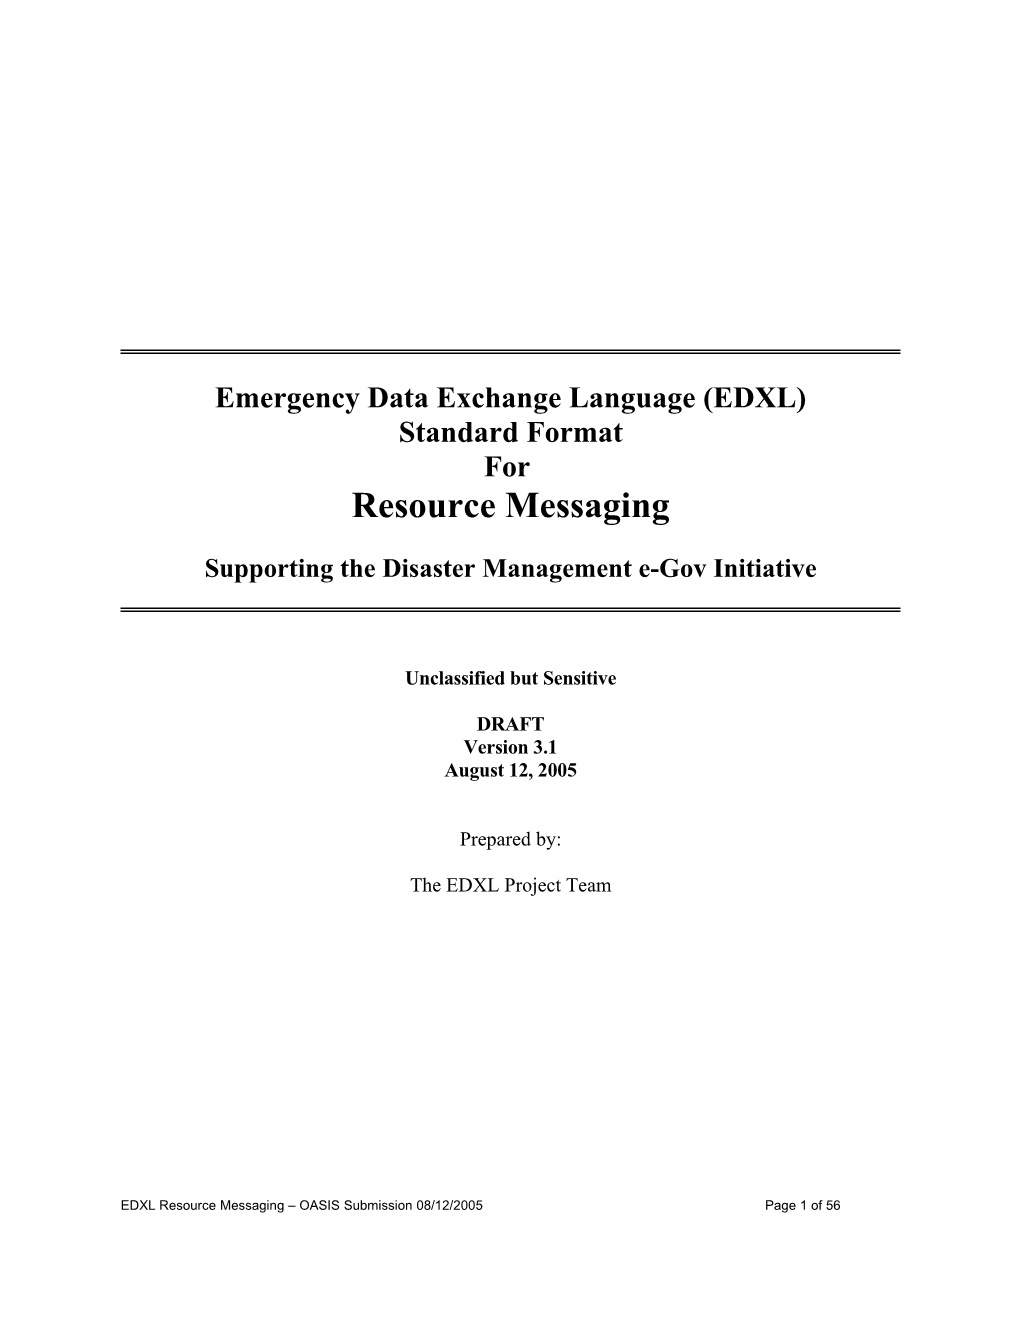 EDXL Resource Messaging Specification